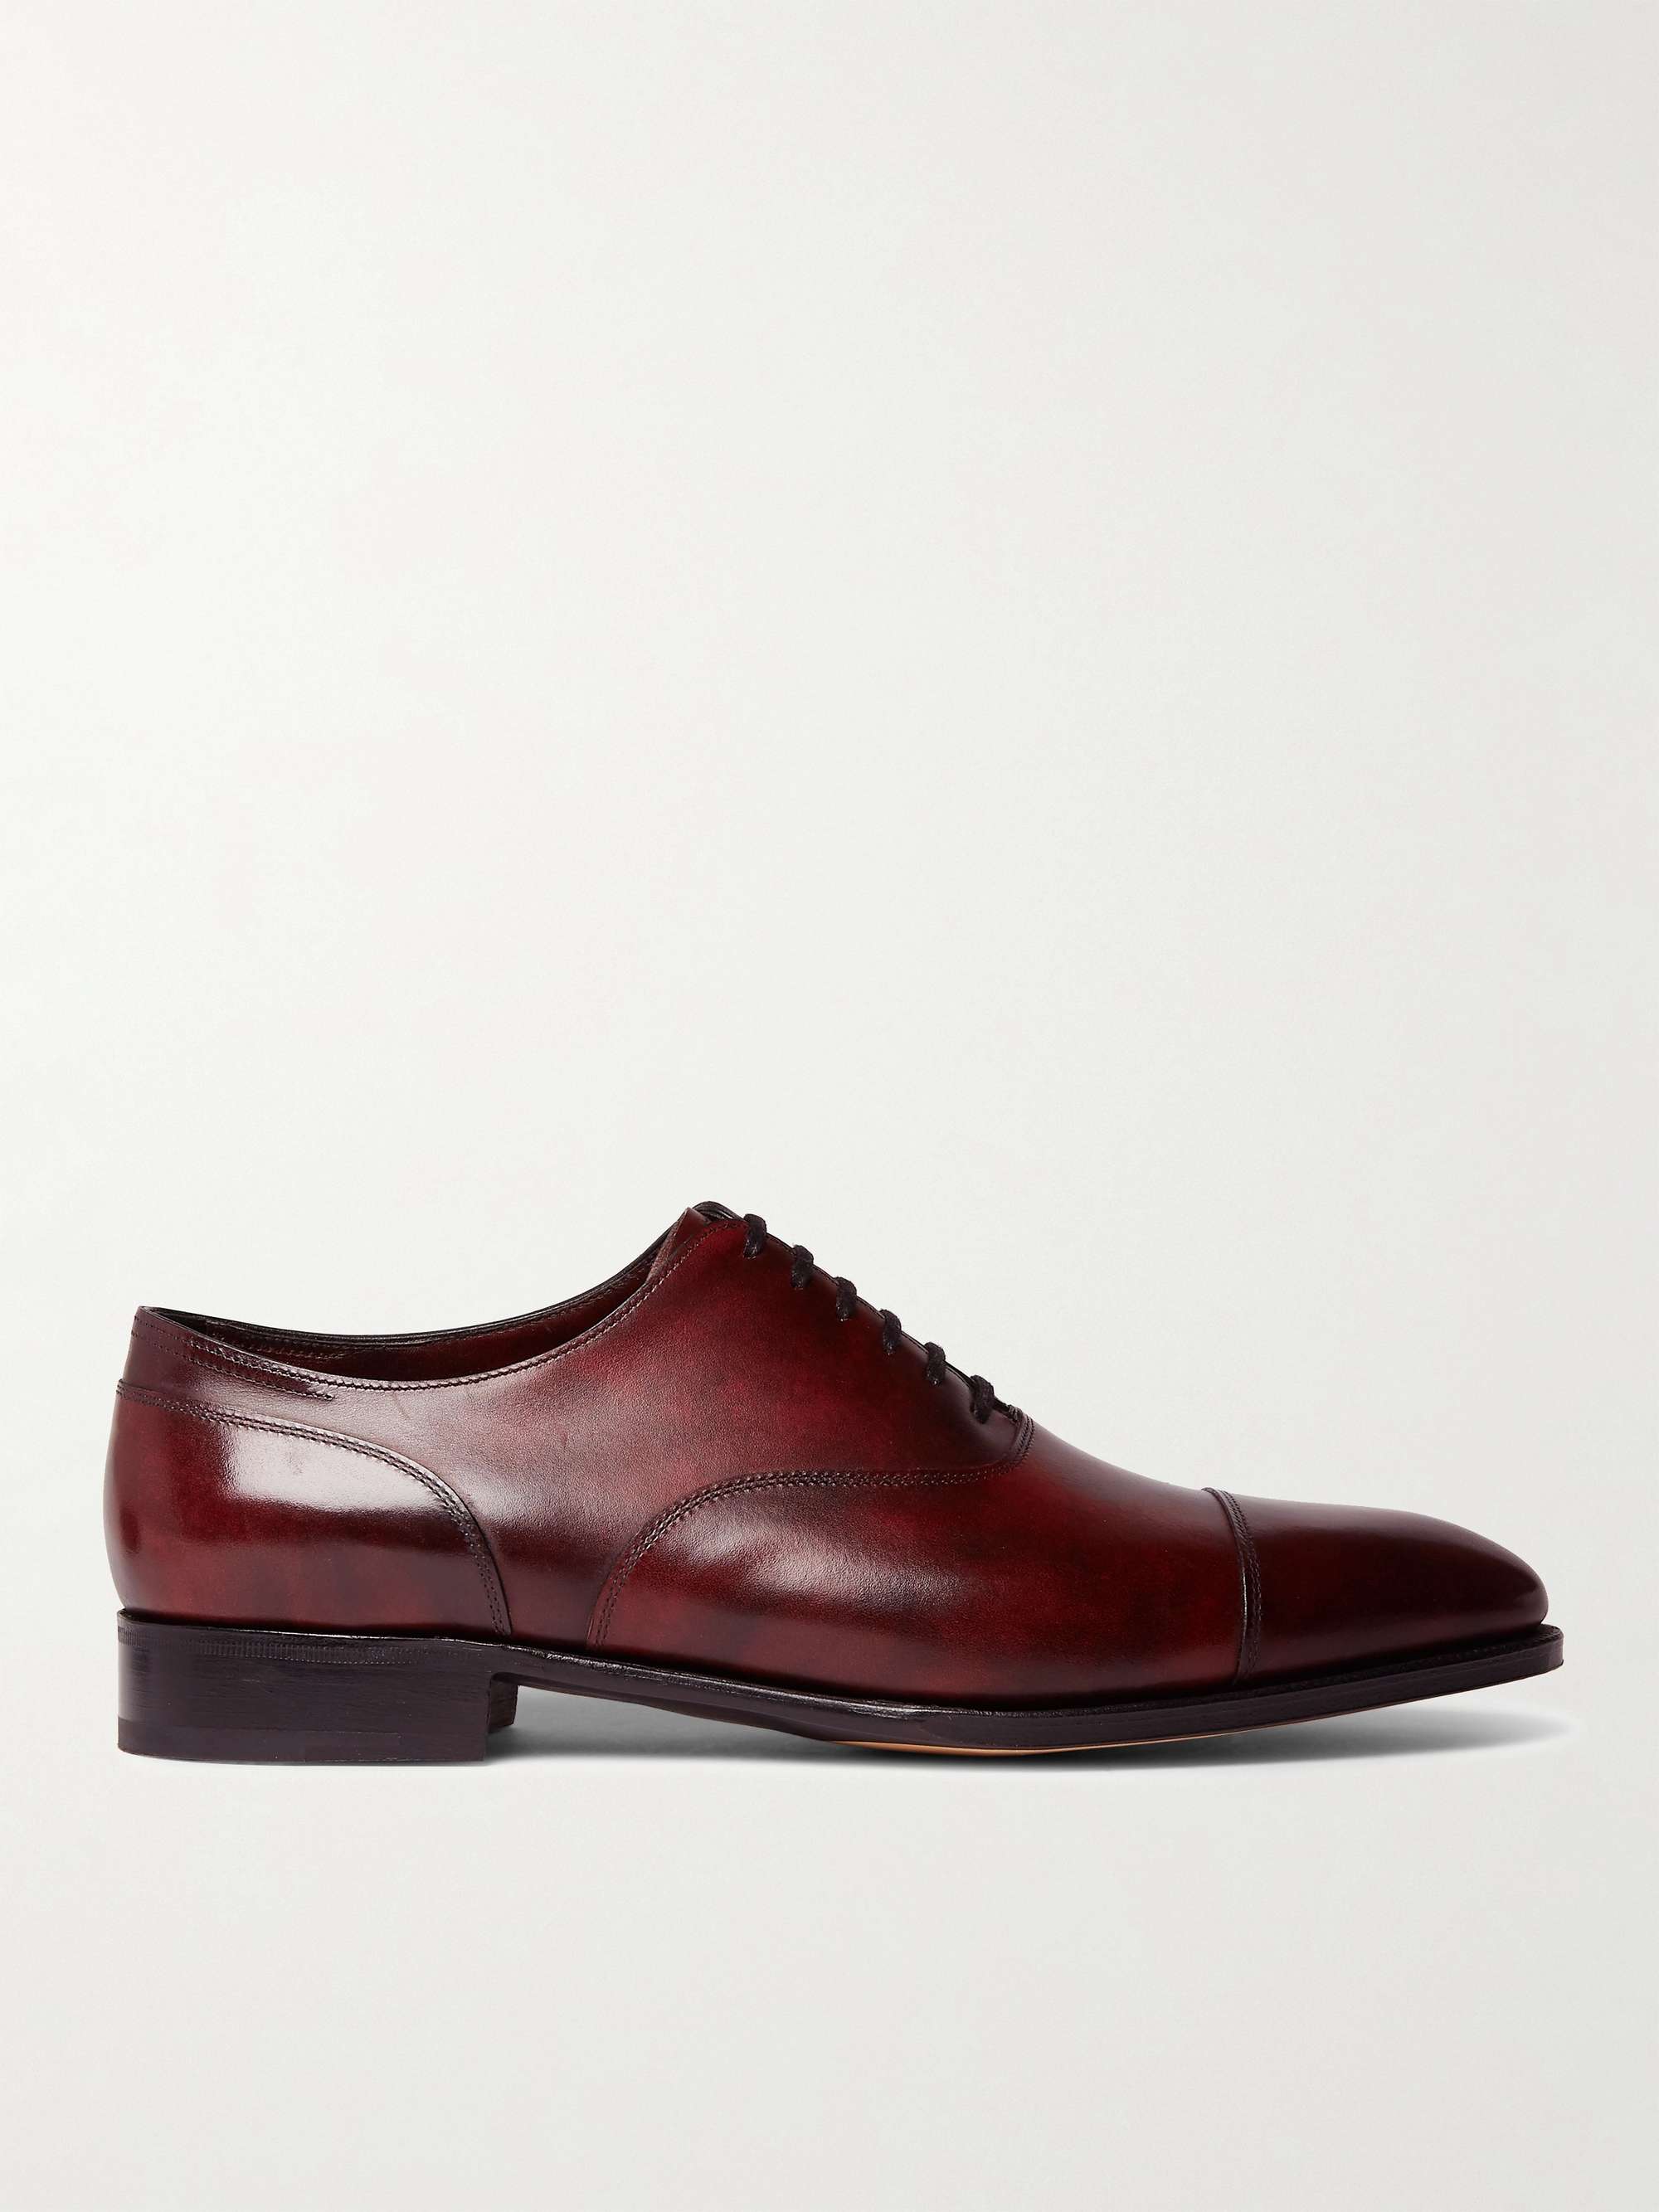 JOHN LOBB Alford Museum Burnished-Leather Cap-Toe Oxford Shoes